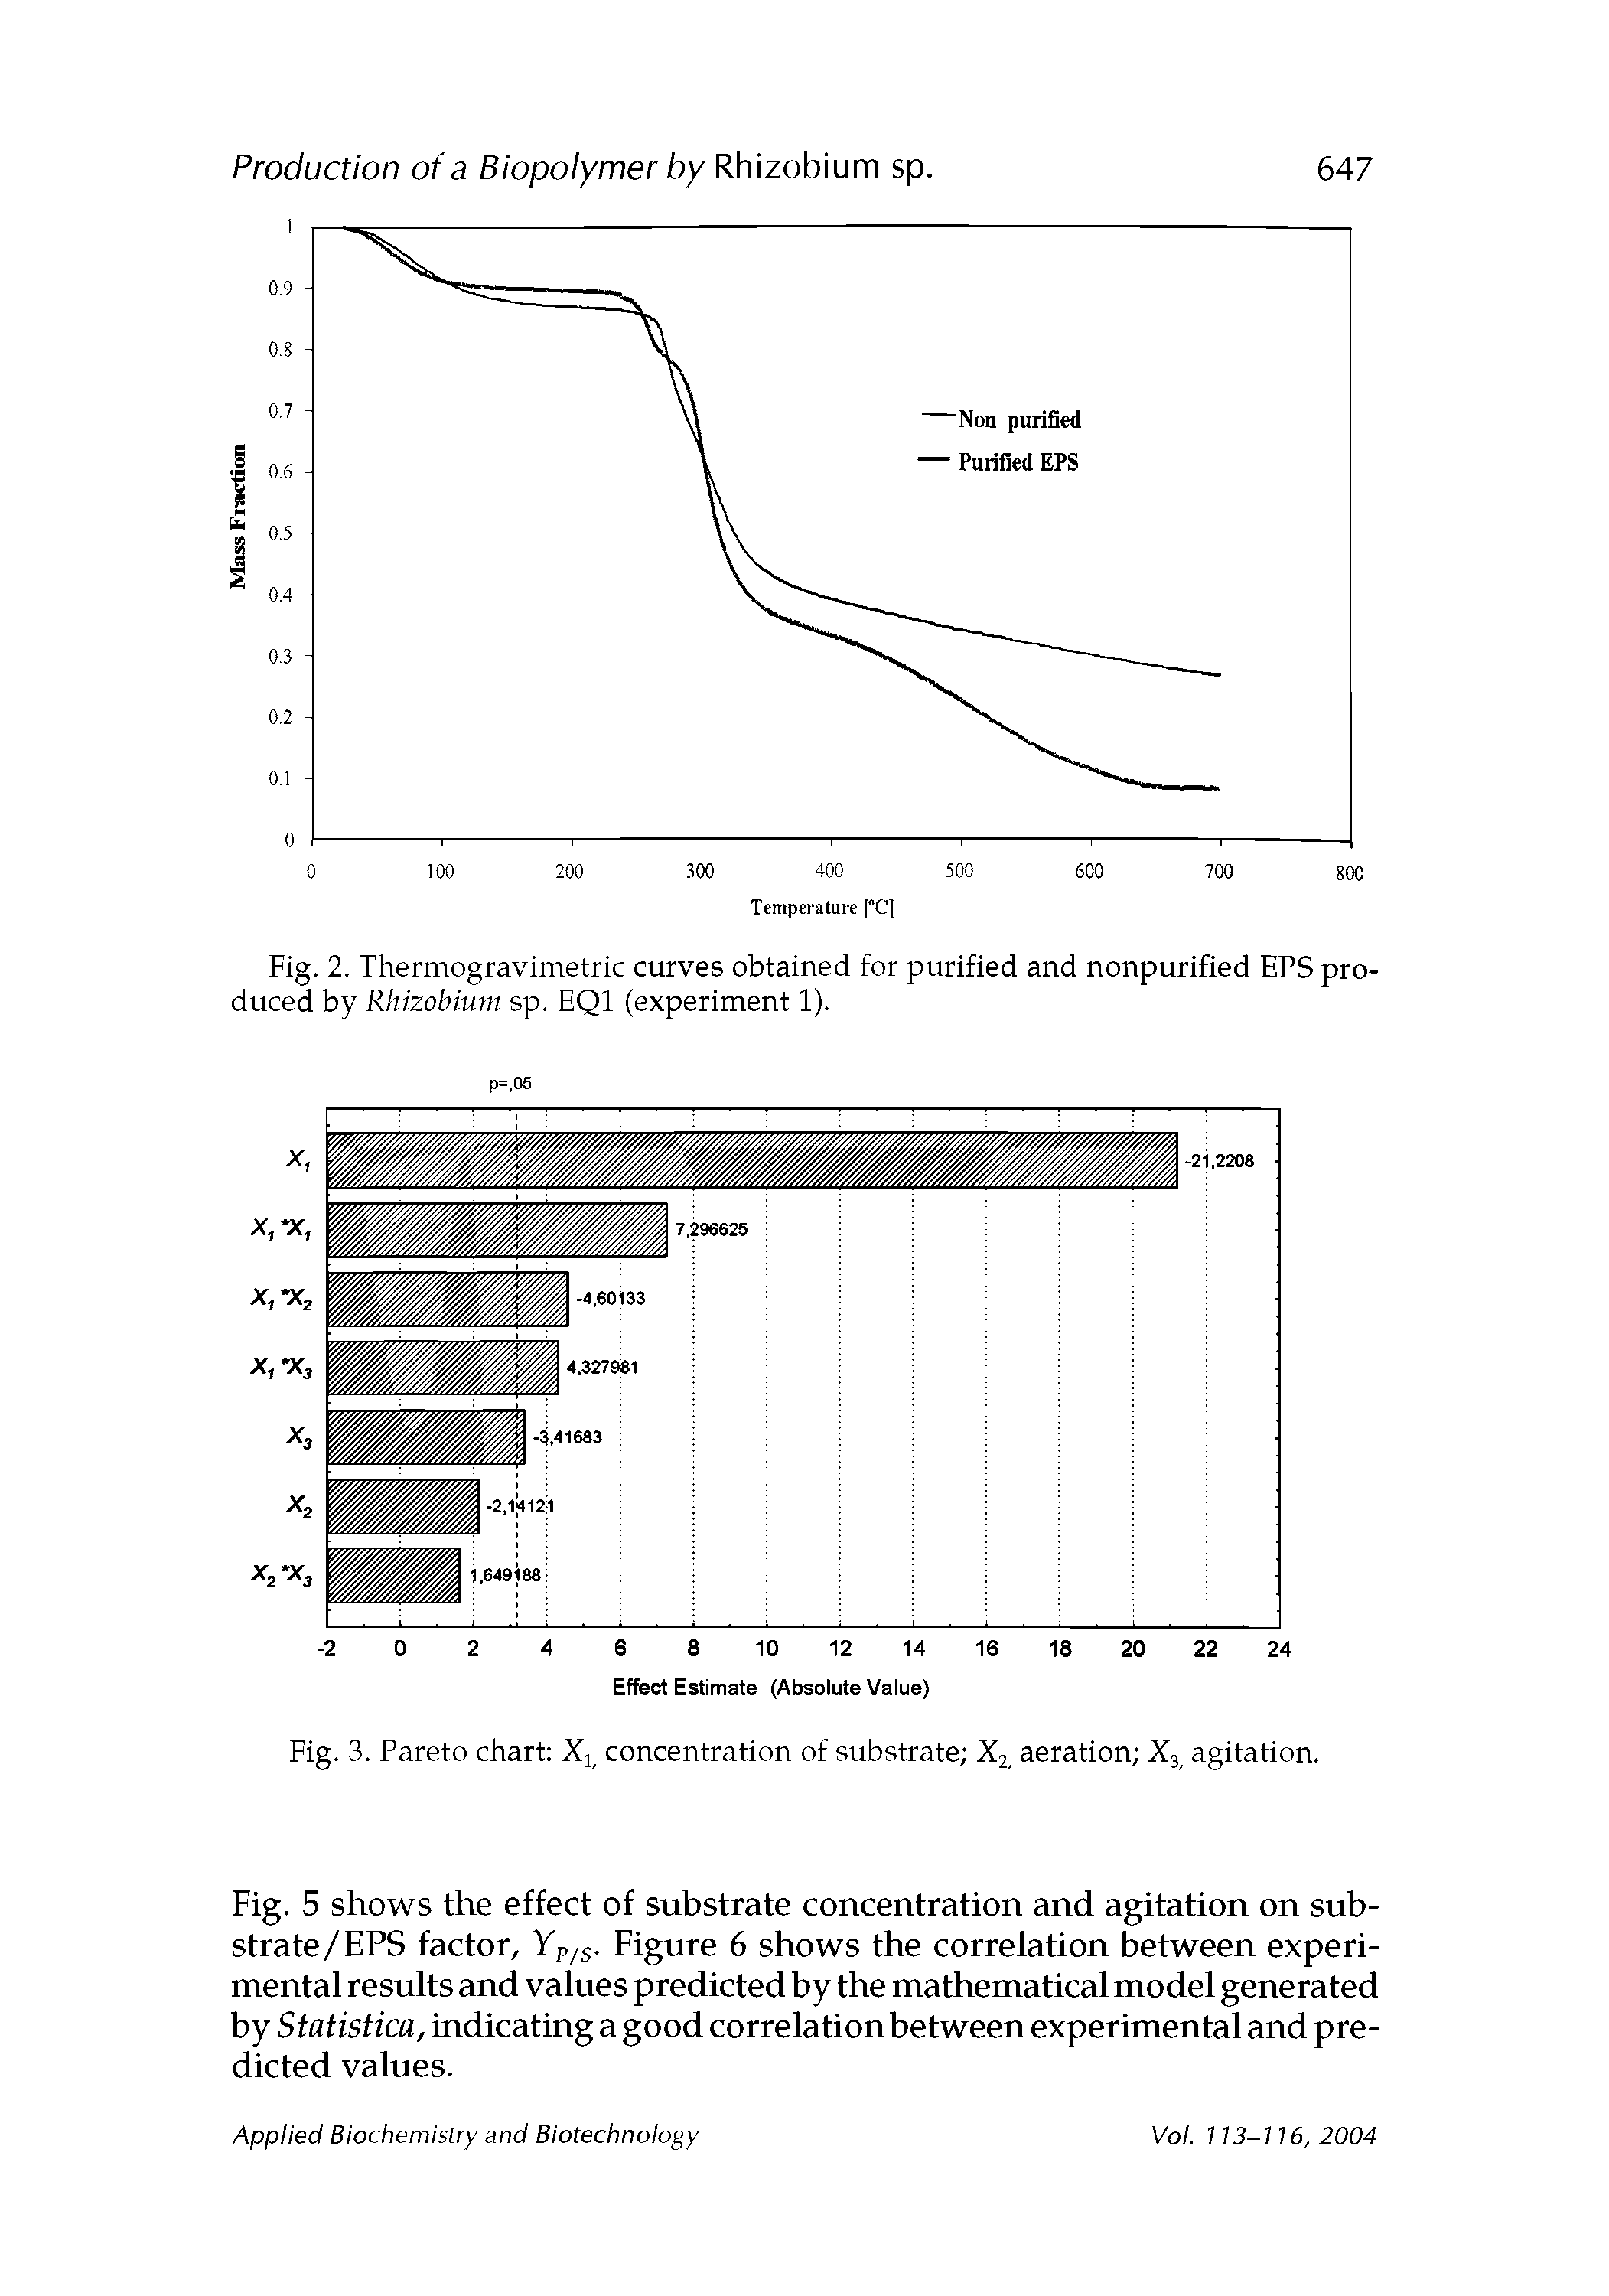 Fig. 3. Pareto chart Xt concentration of substrate X2 aeration X3 agitation.